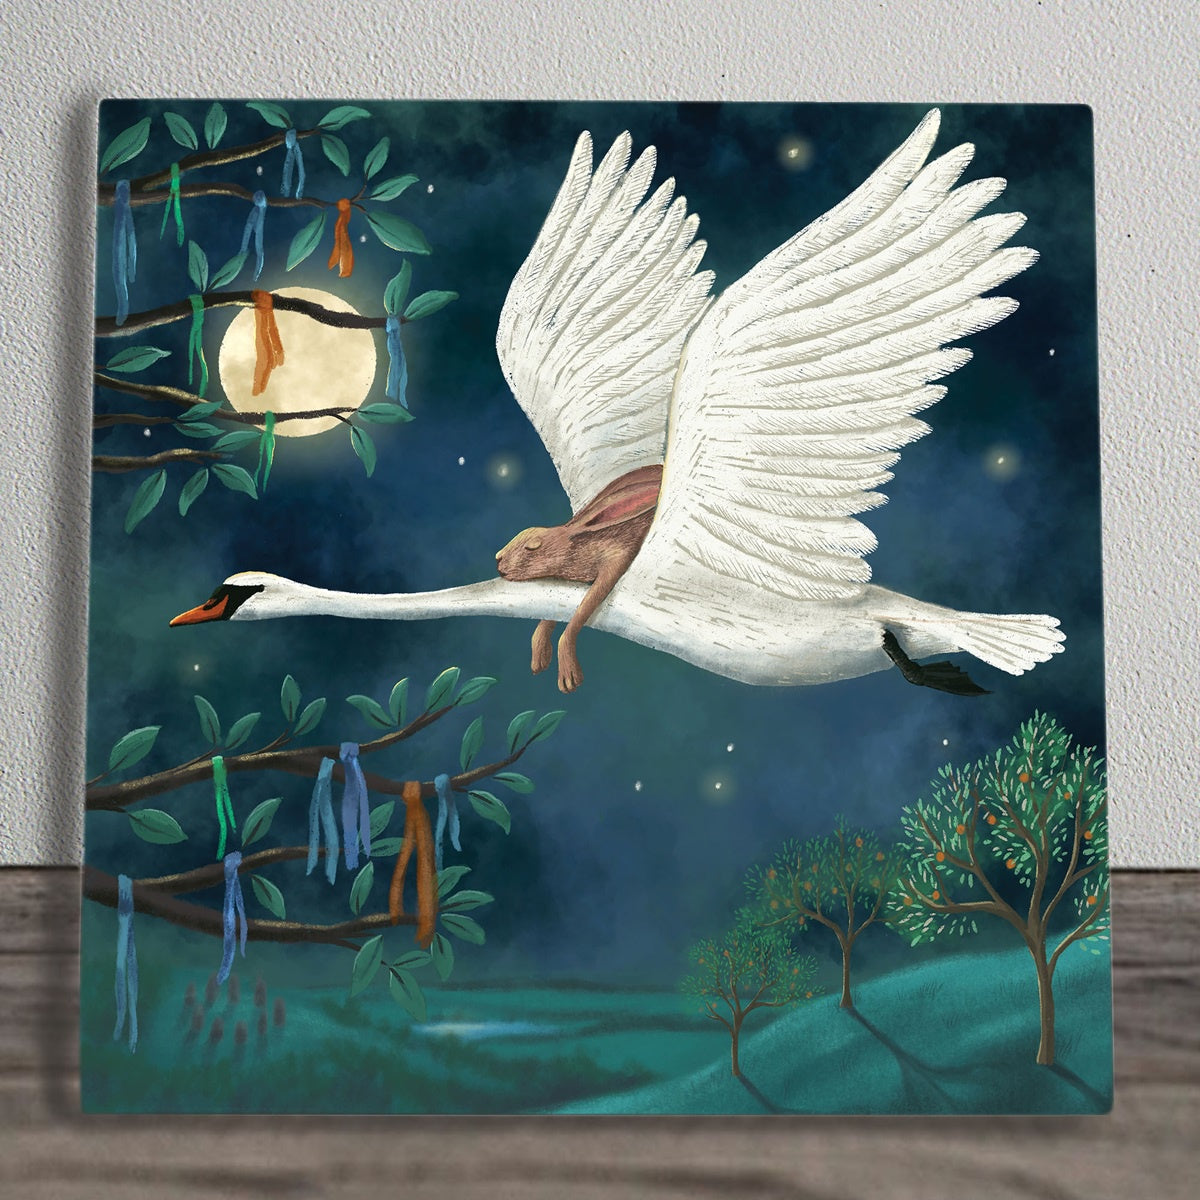 Full Moon Cloutie Dreams Painted Tile